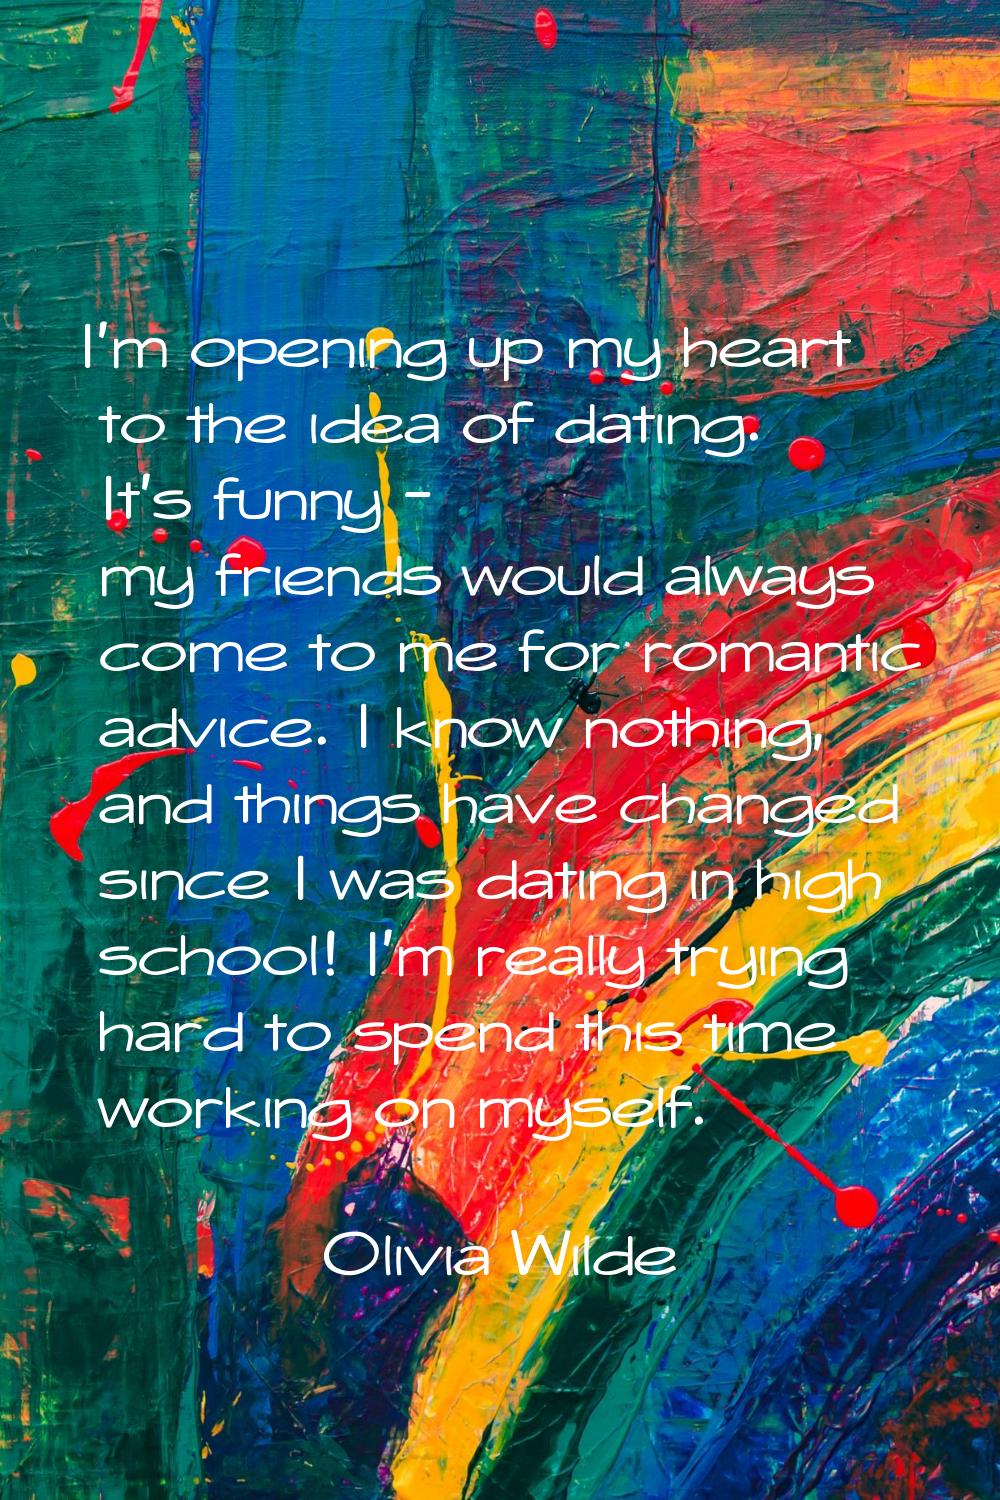 I'm opening up my heart to the idea of dating. It's funny - my friends would always come to me for 